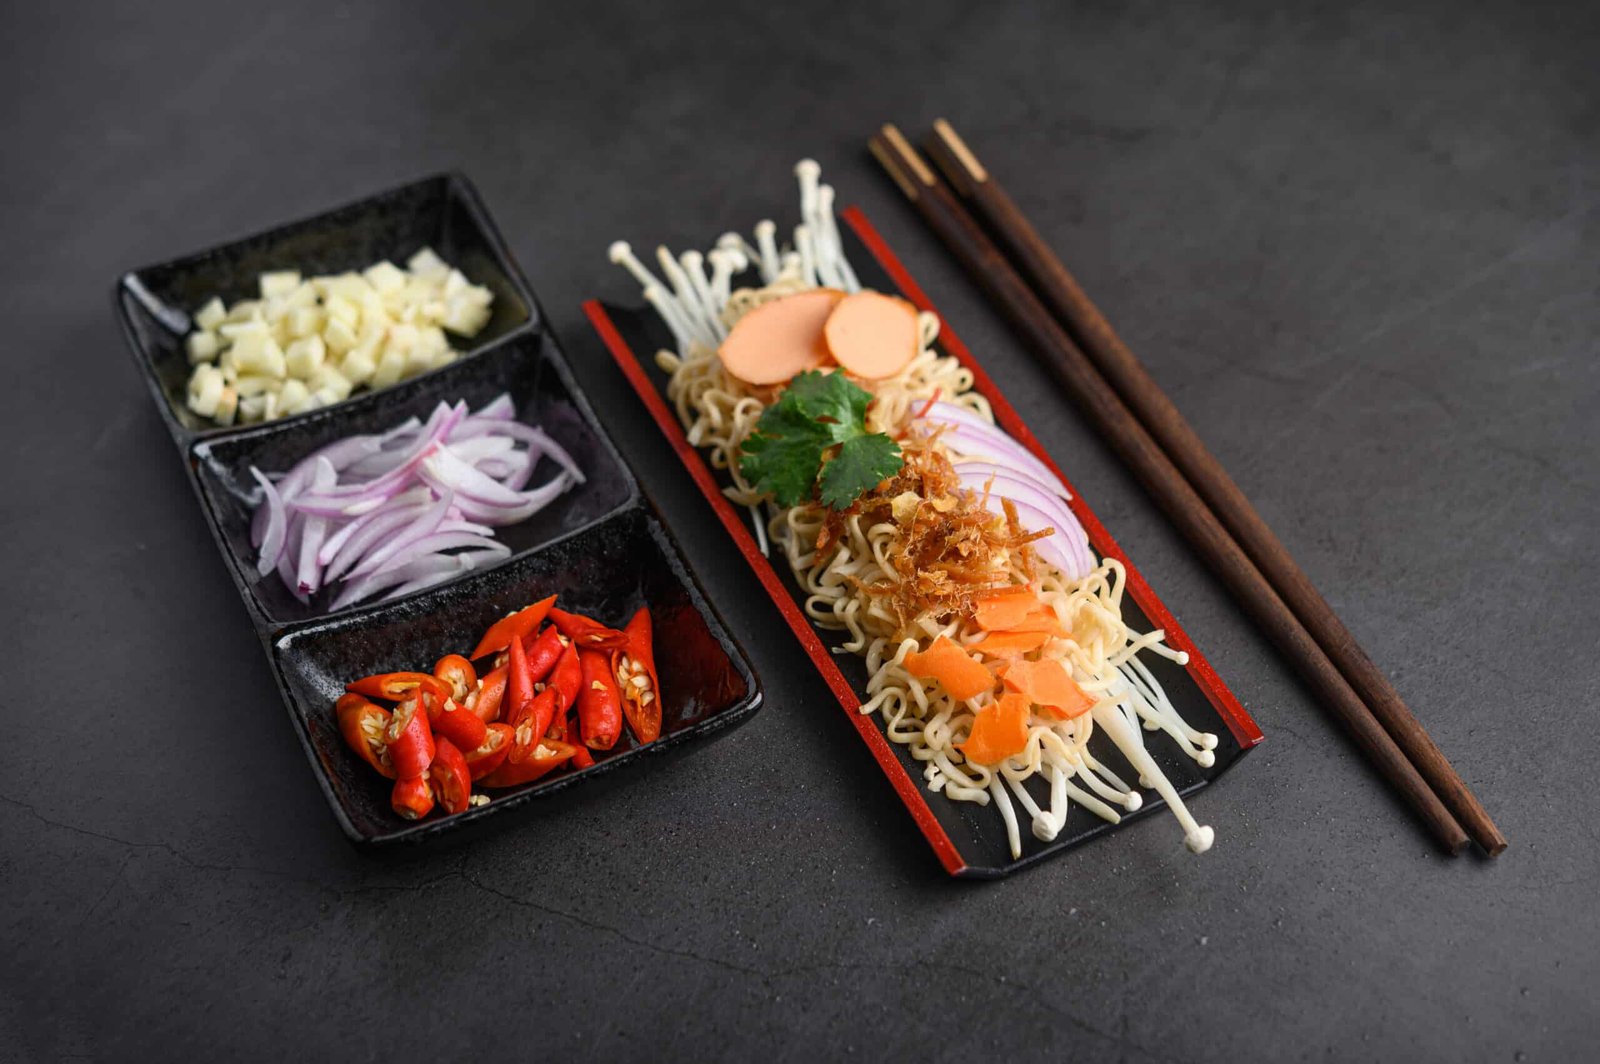 konjac japanese food on two platters nad two chosticks on a black surface